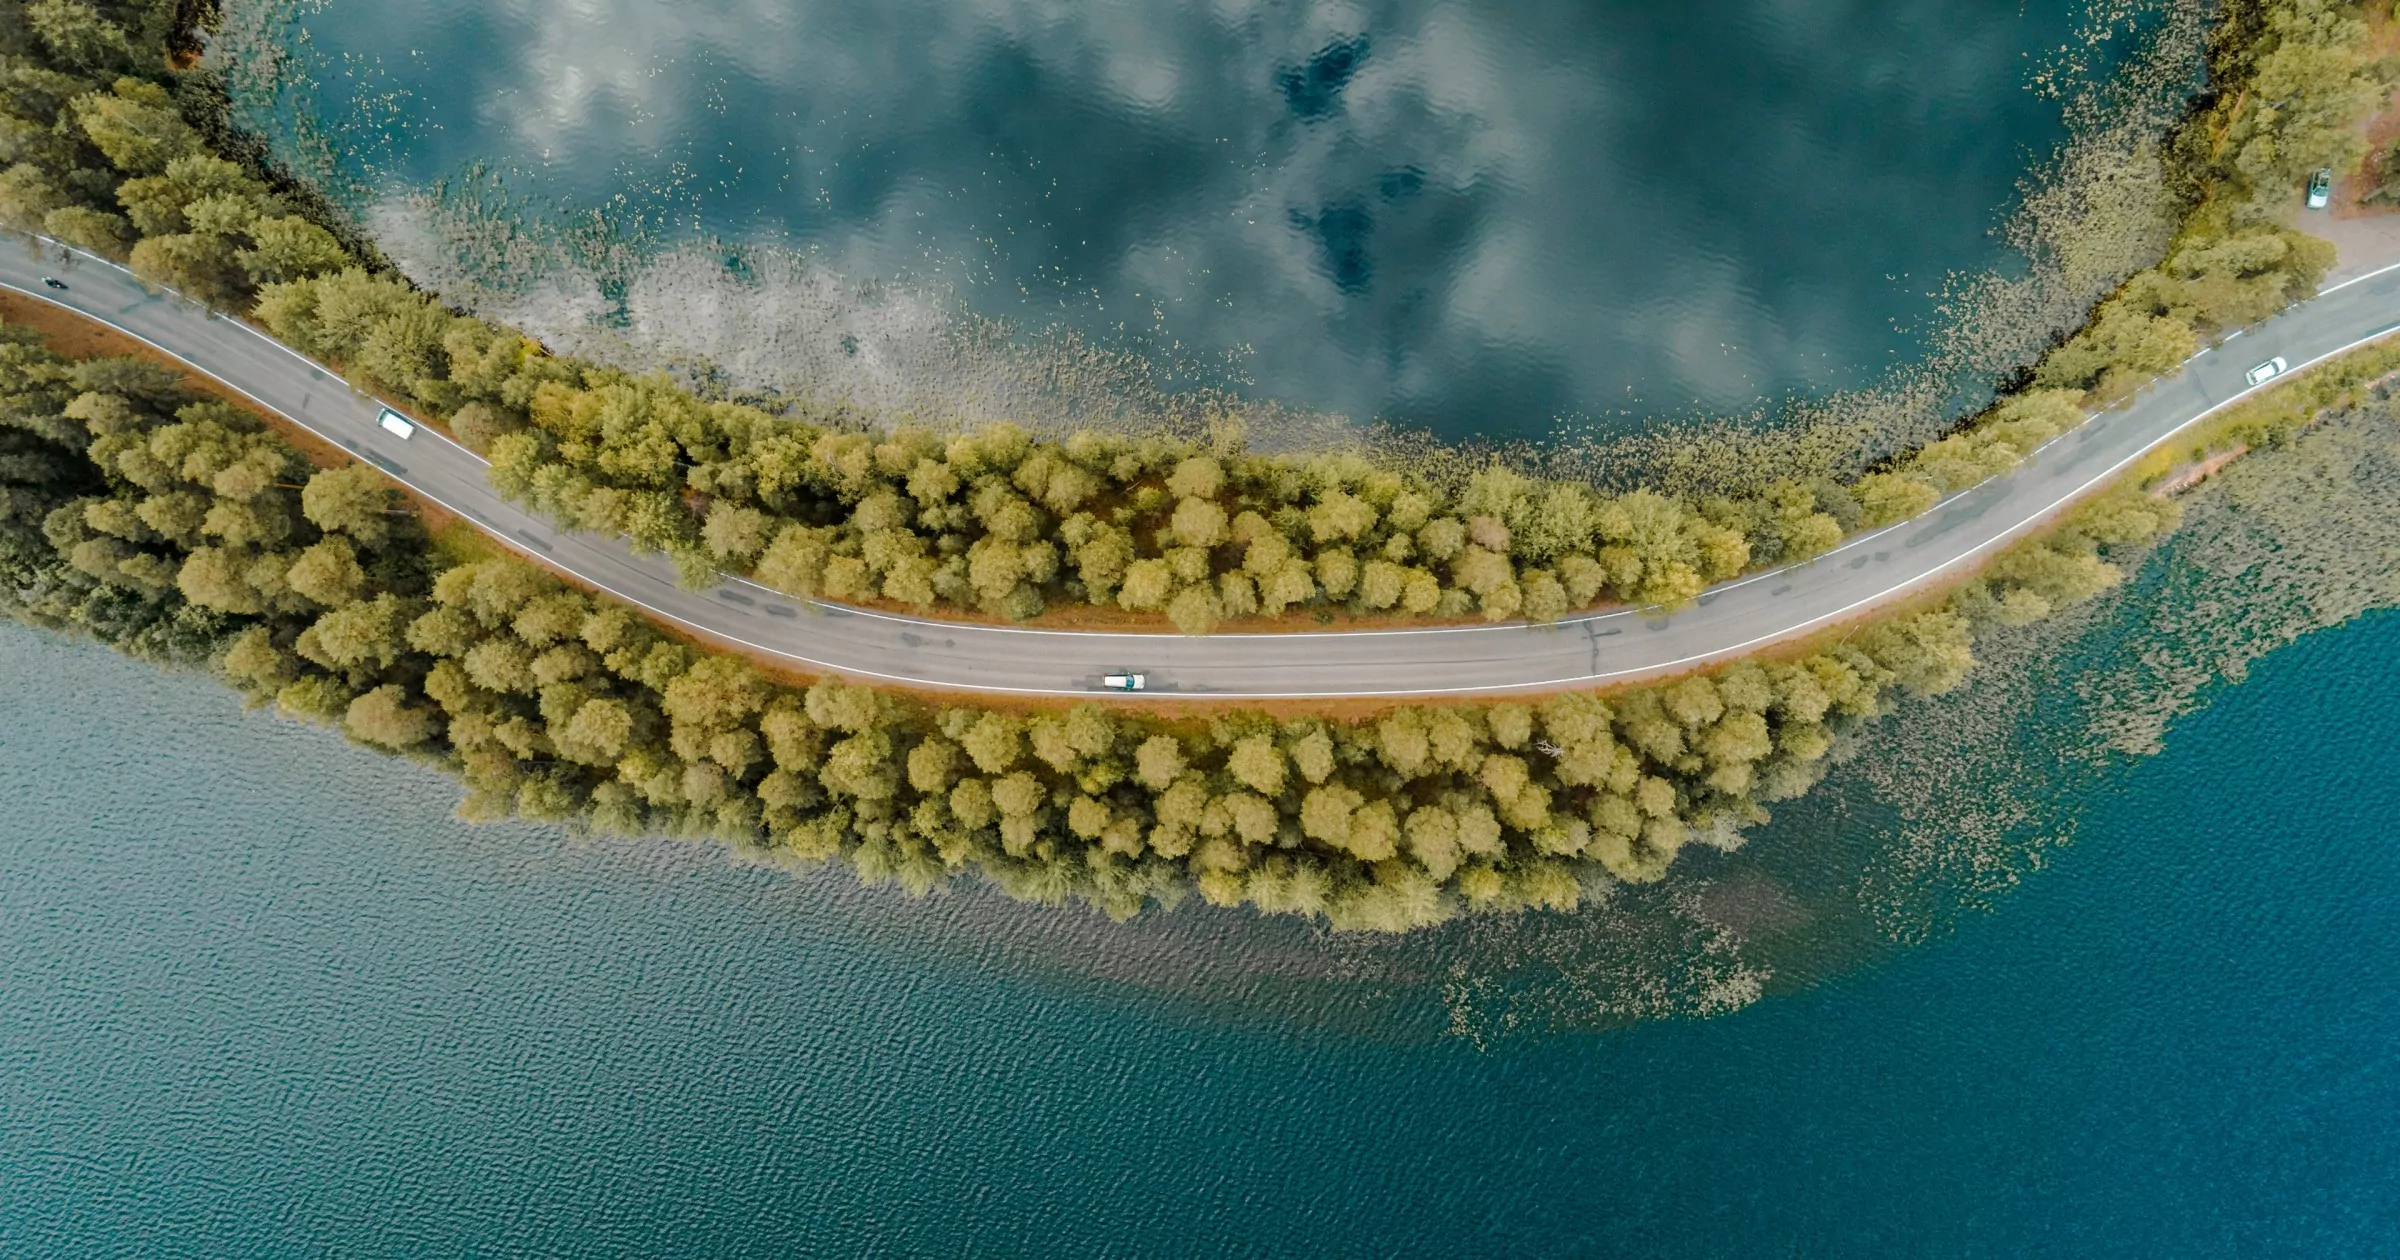 Aerial view of shipping truck on road with trees